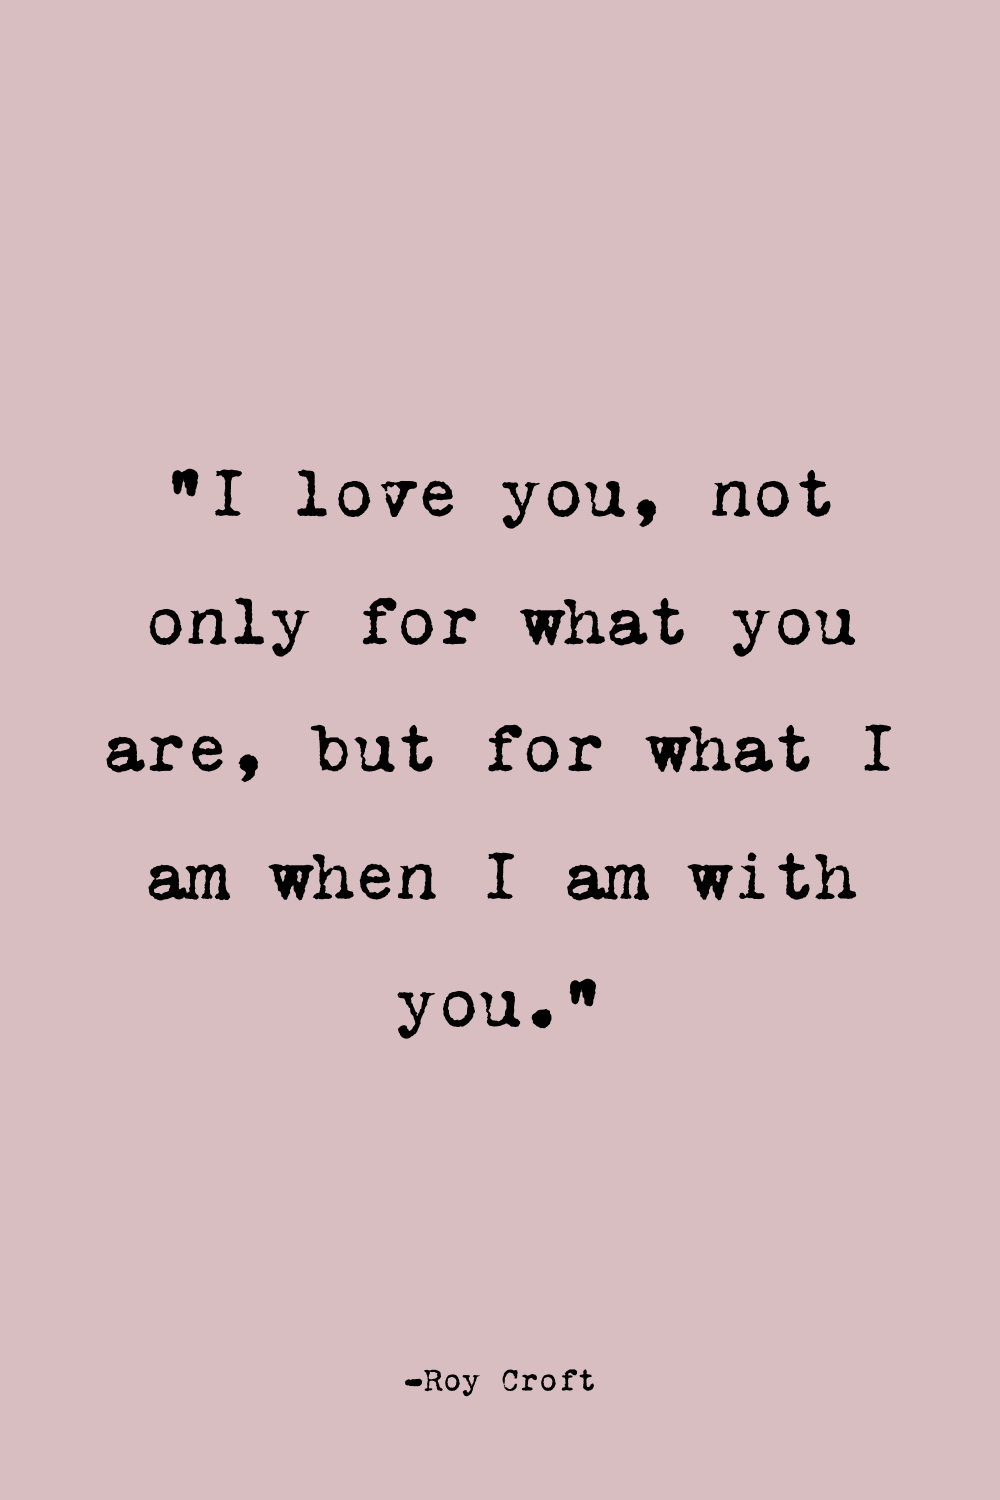 15 Beautiful Love Quotes- Messages to Inspire Your Heart